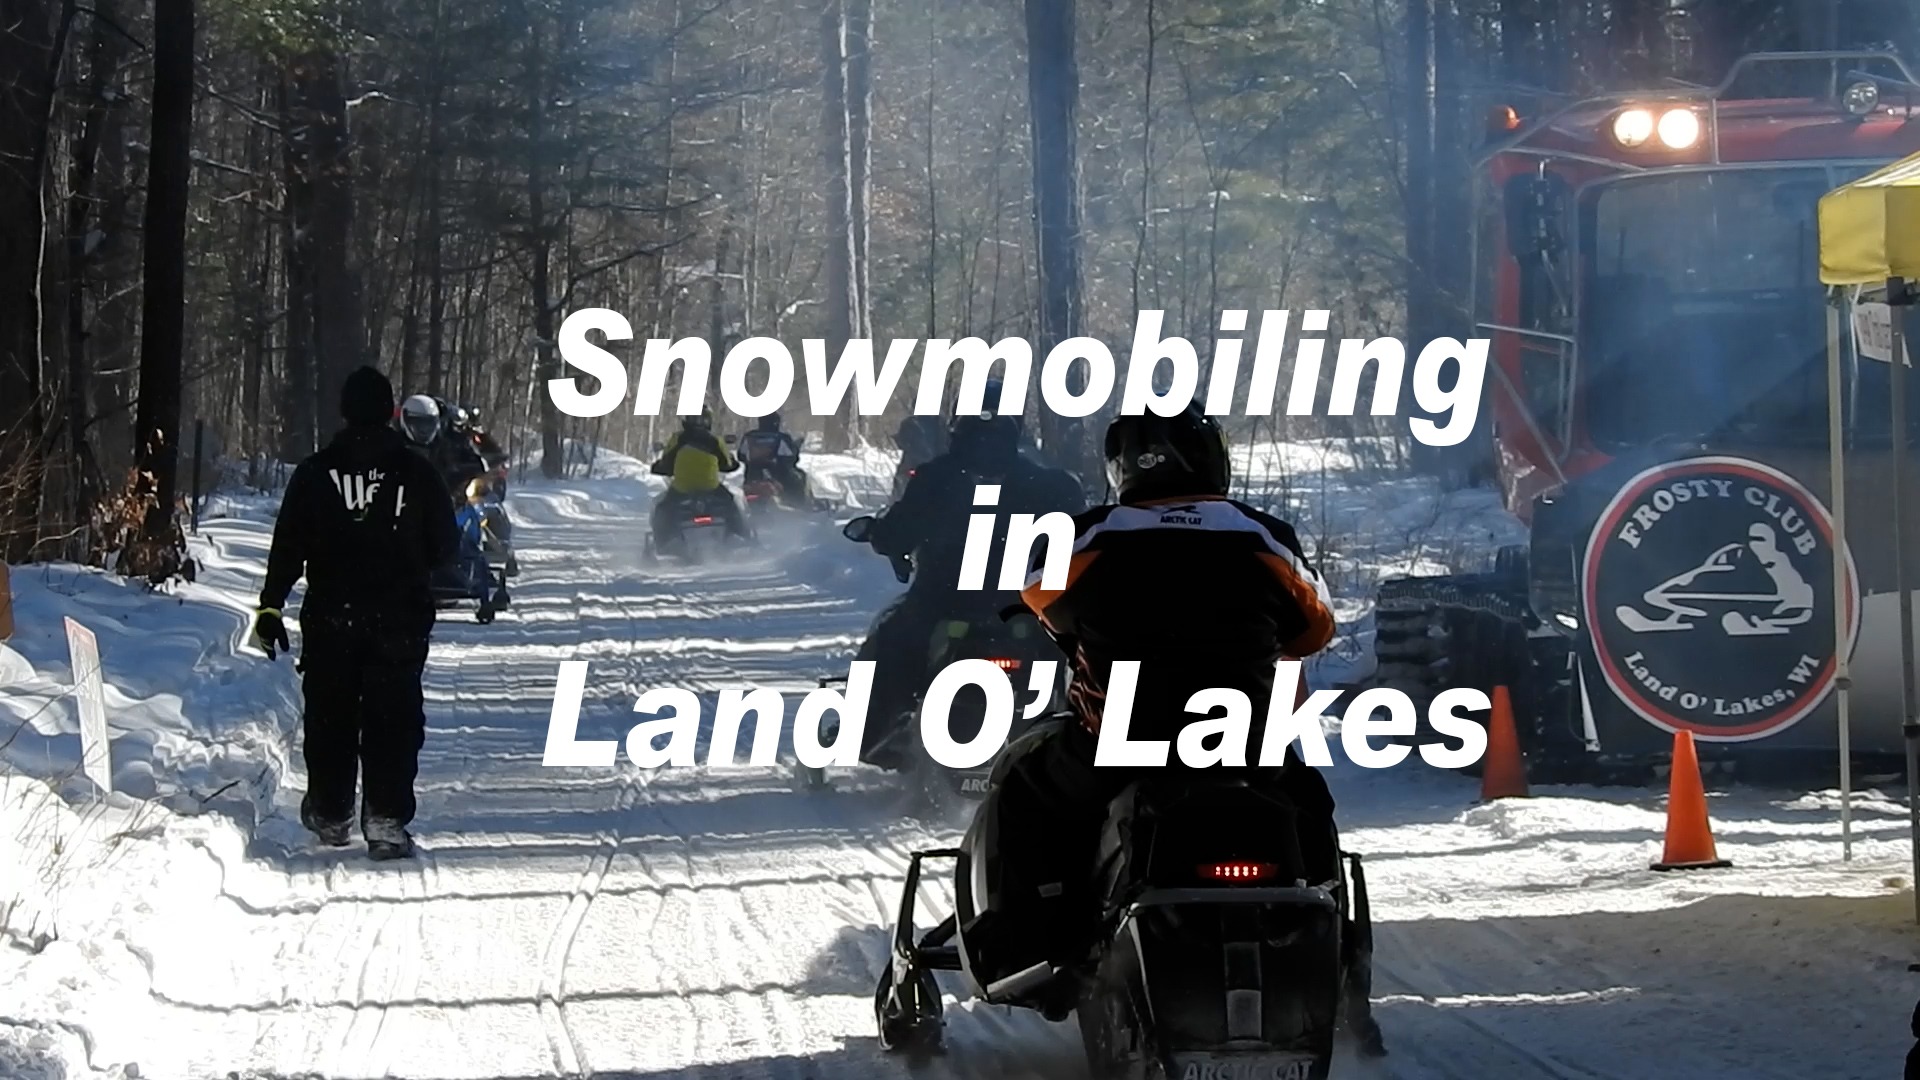  Snowmobiling in Land O' Lakes